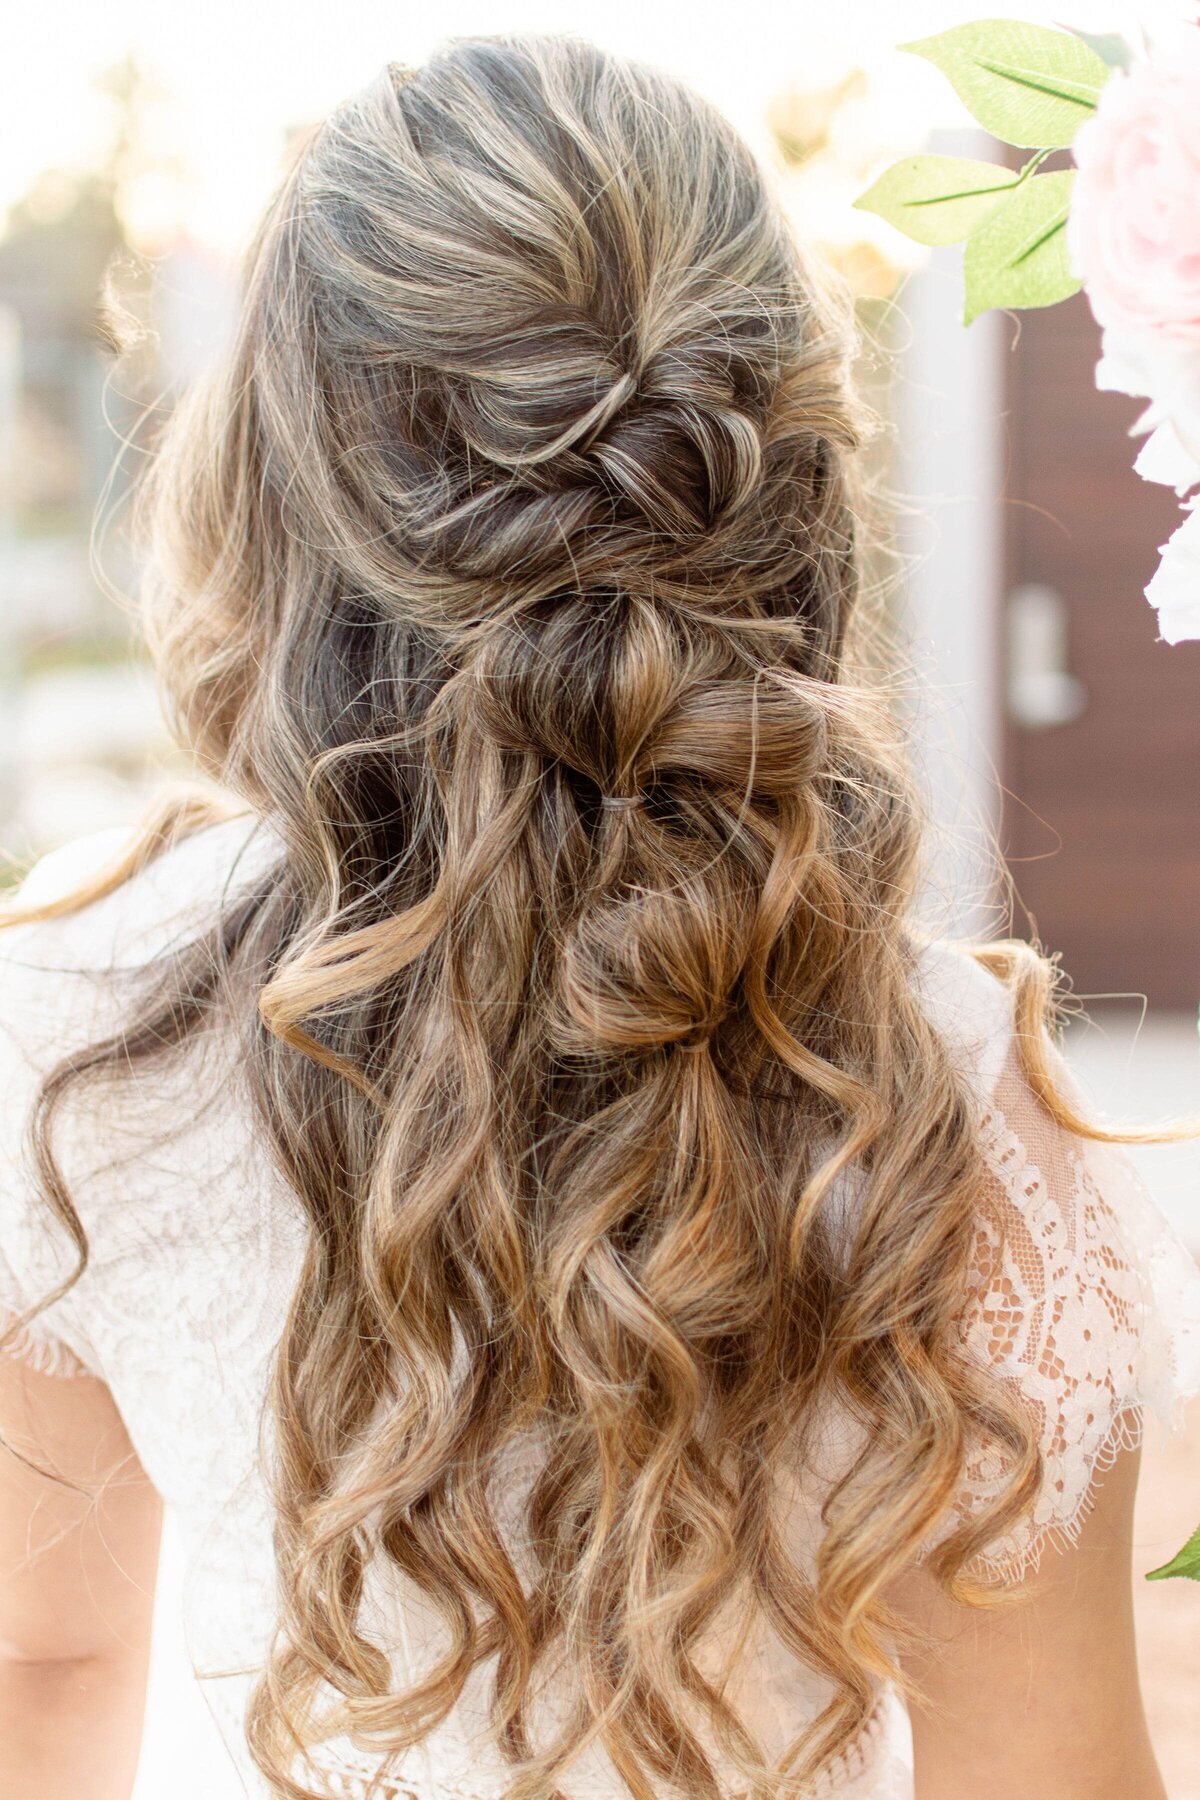 Lilly Bridal Artistry - Hair and Makeup Artist - Spring, TX